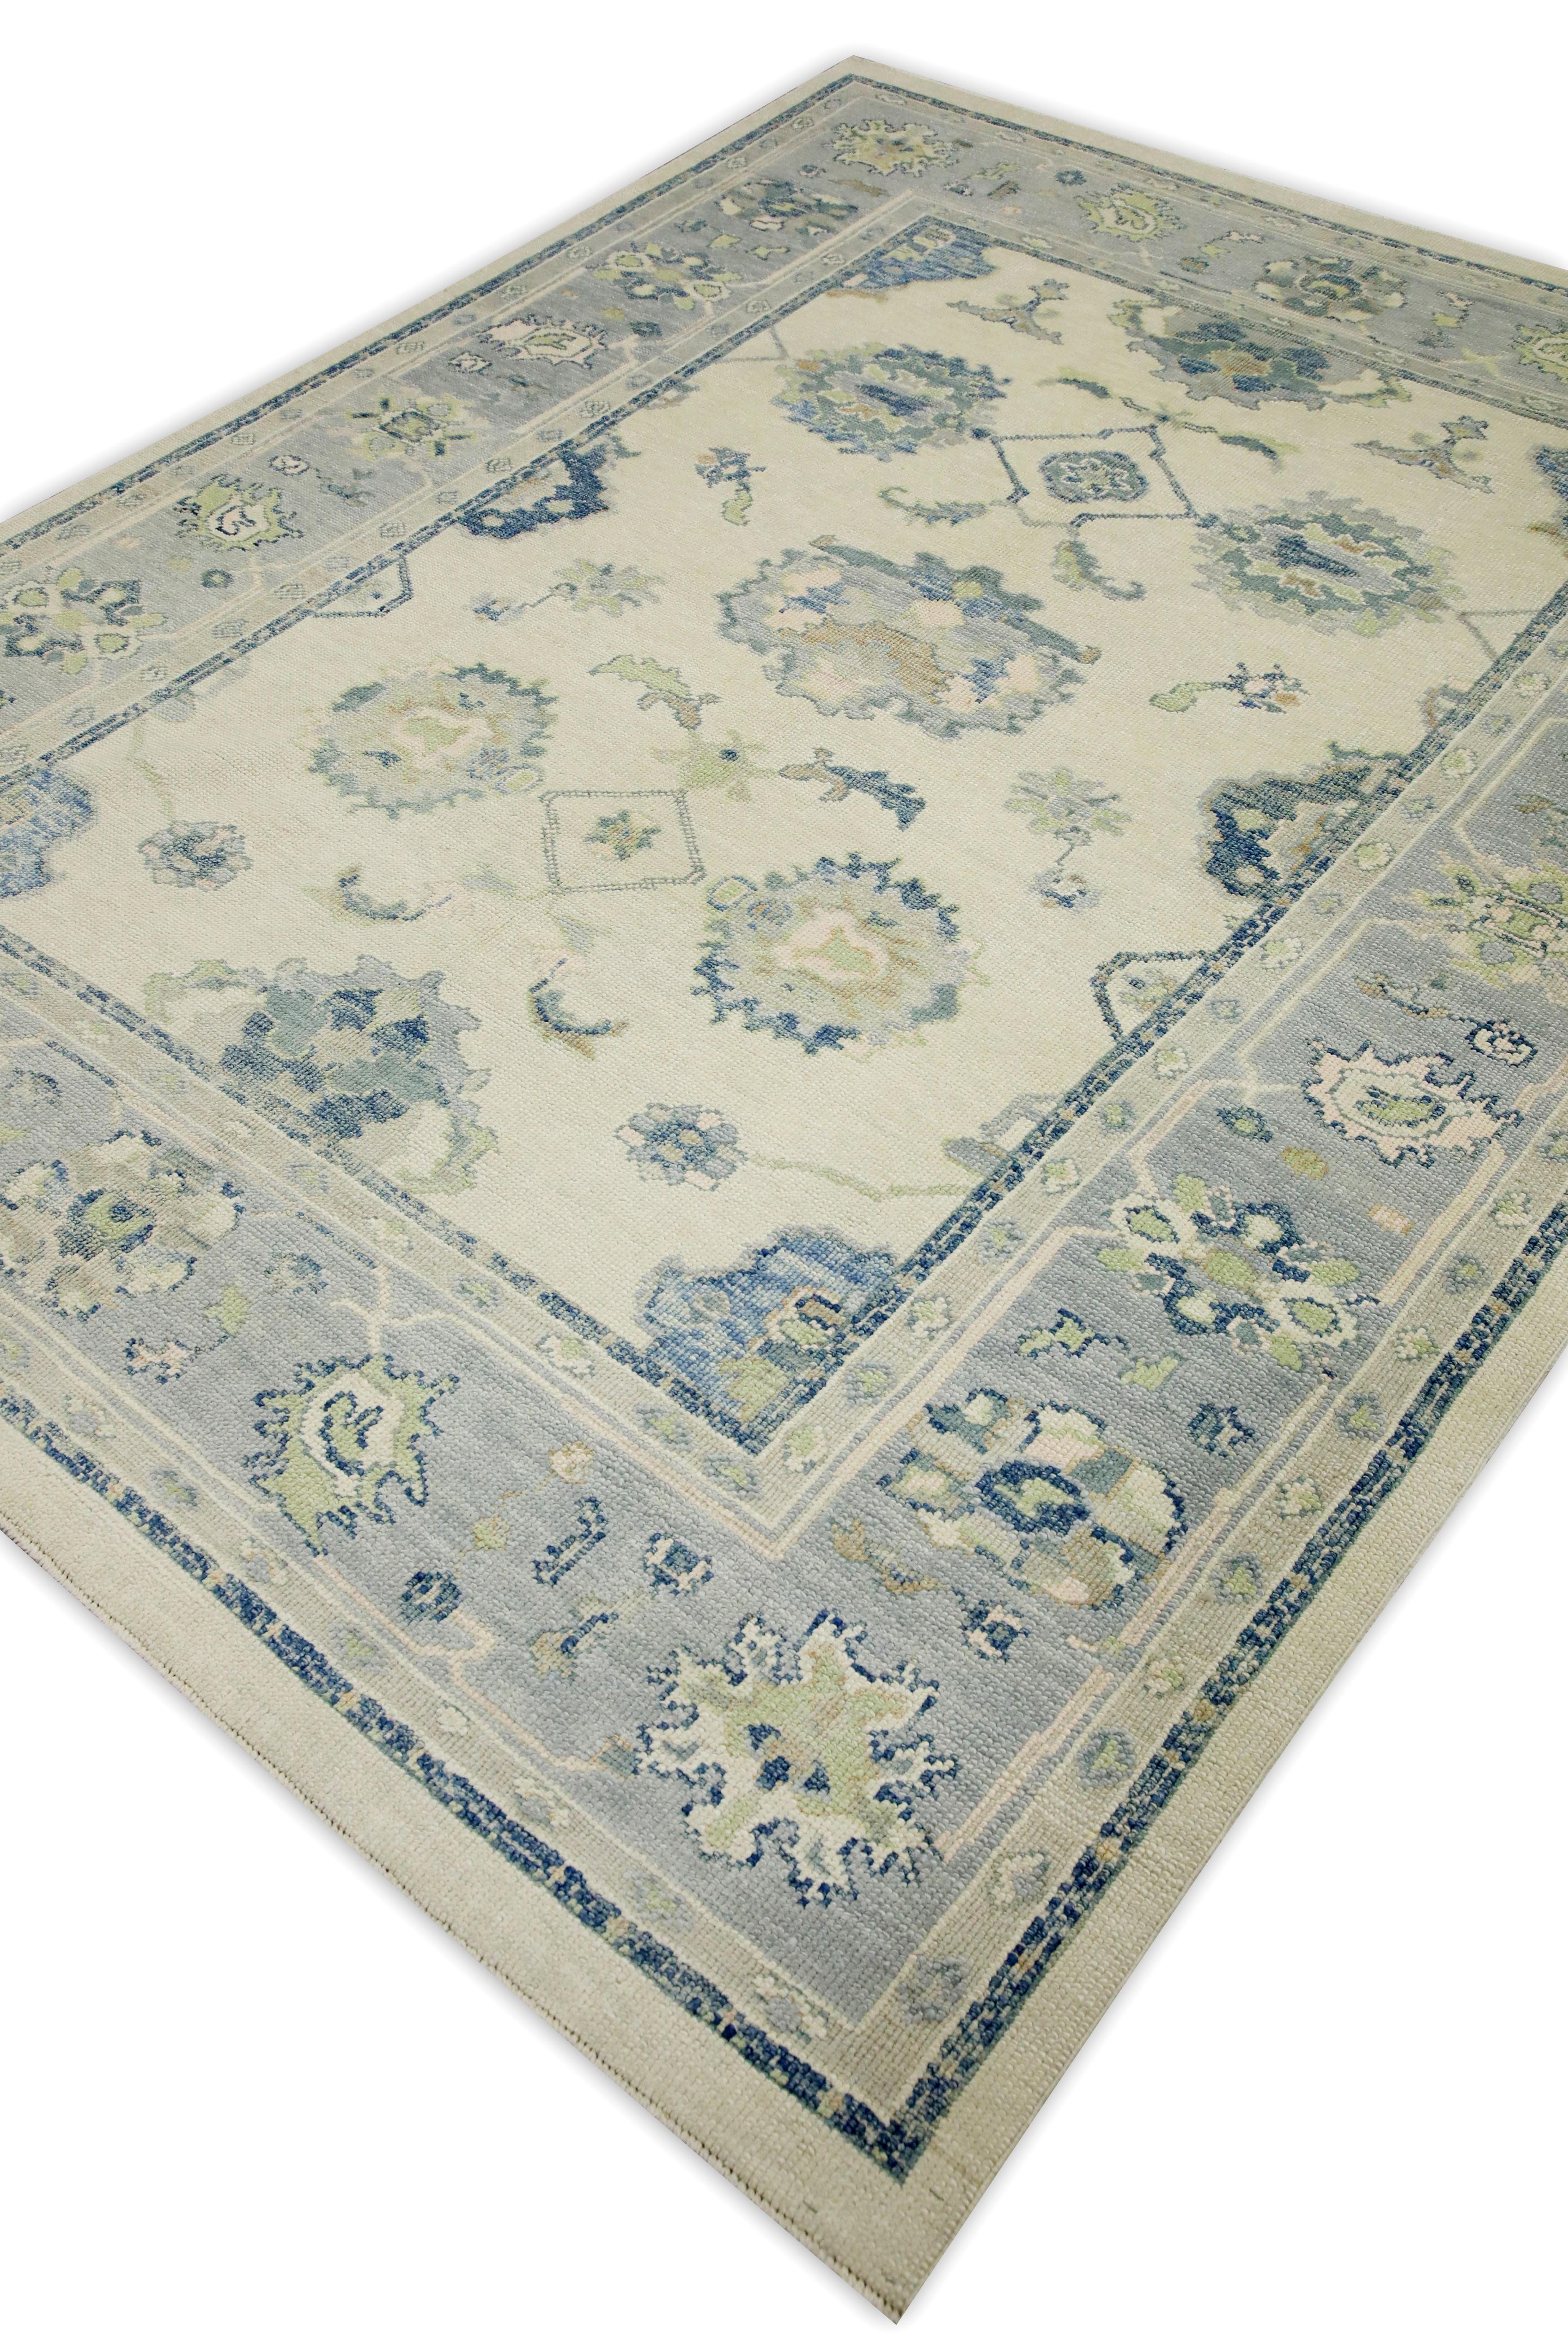 Contemporary Cream & Blue Floral Design Handwoven Wool Turkish Oushak Rug 7' x 9' For Sale